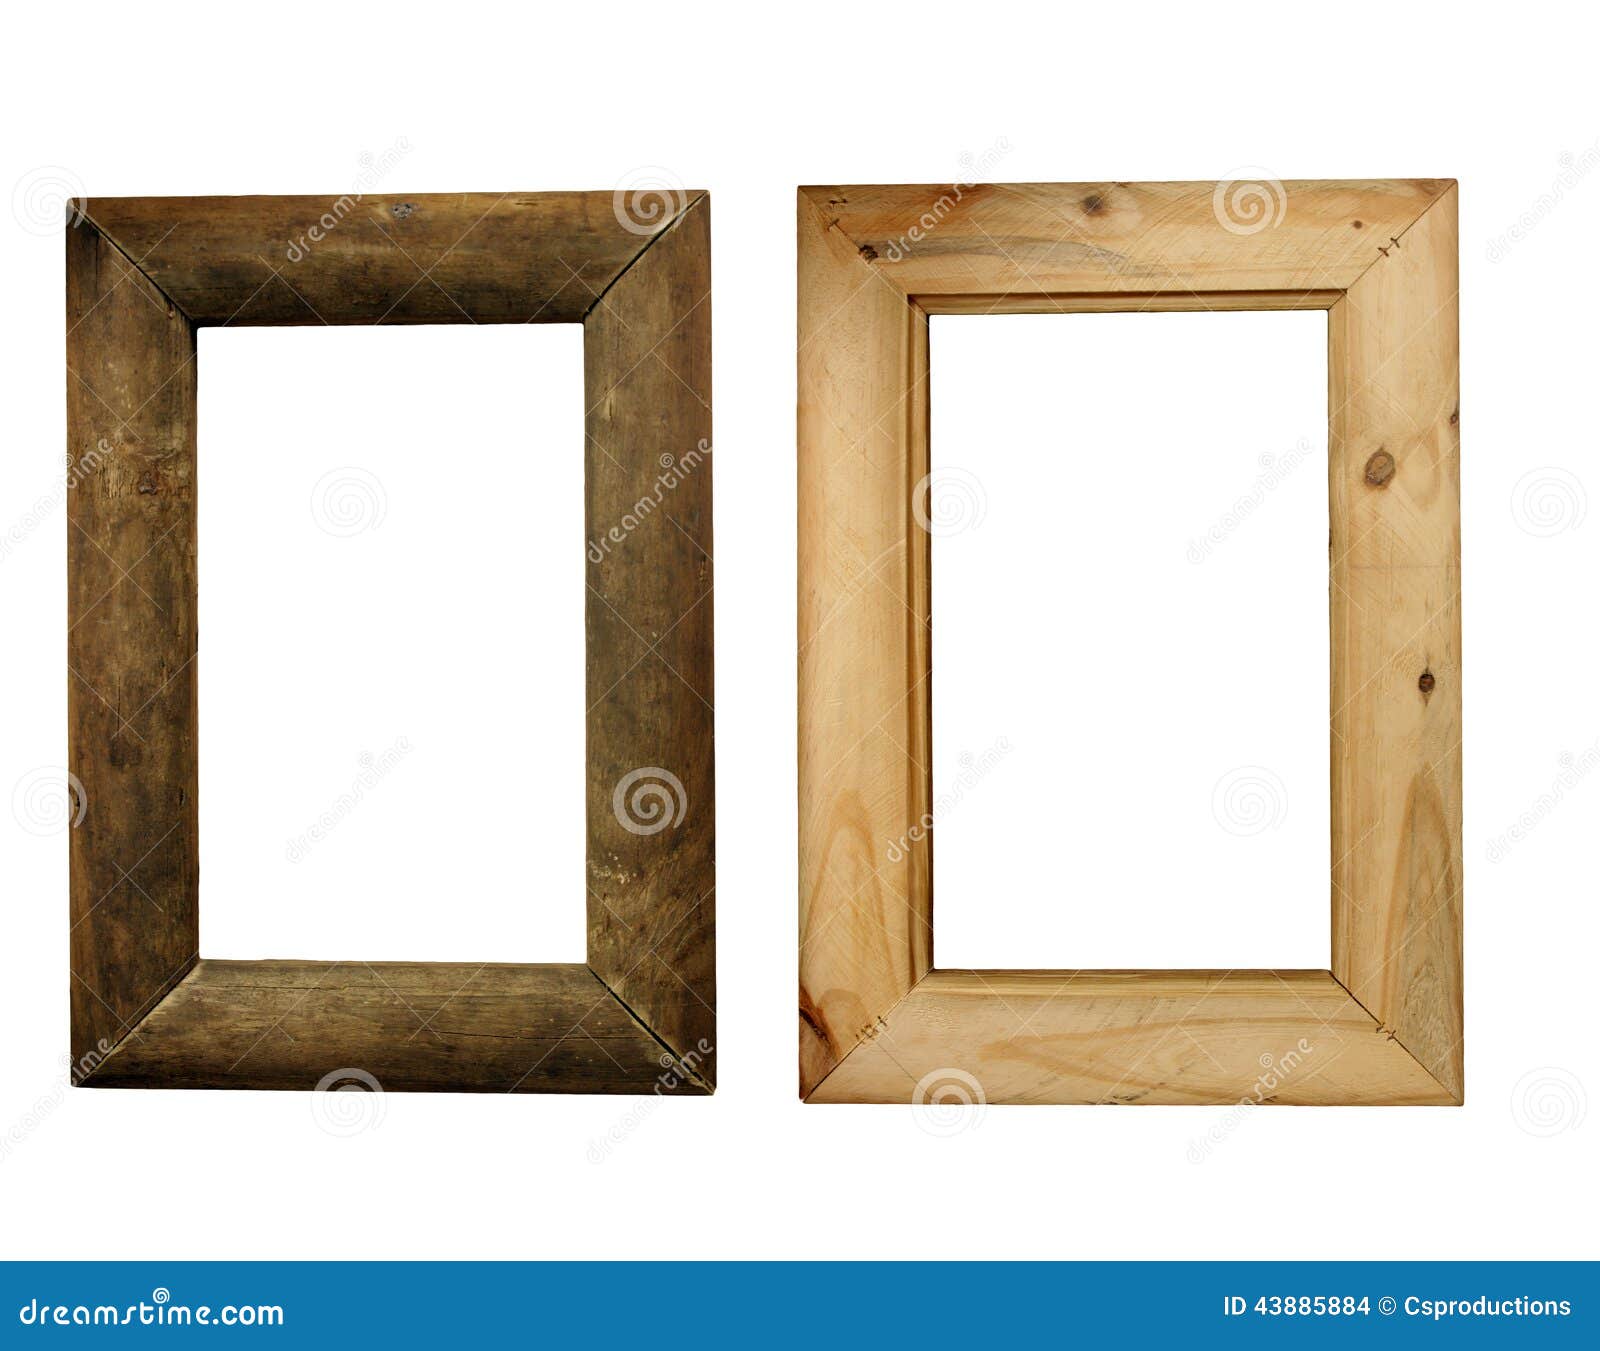 4 x 6 You & Me Horizontal Wall or Table Top Picture Photograph Frame made of Real Wood Slats 694001